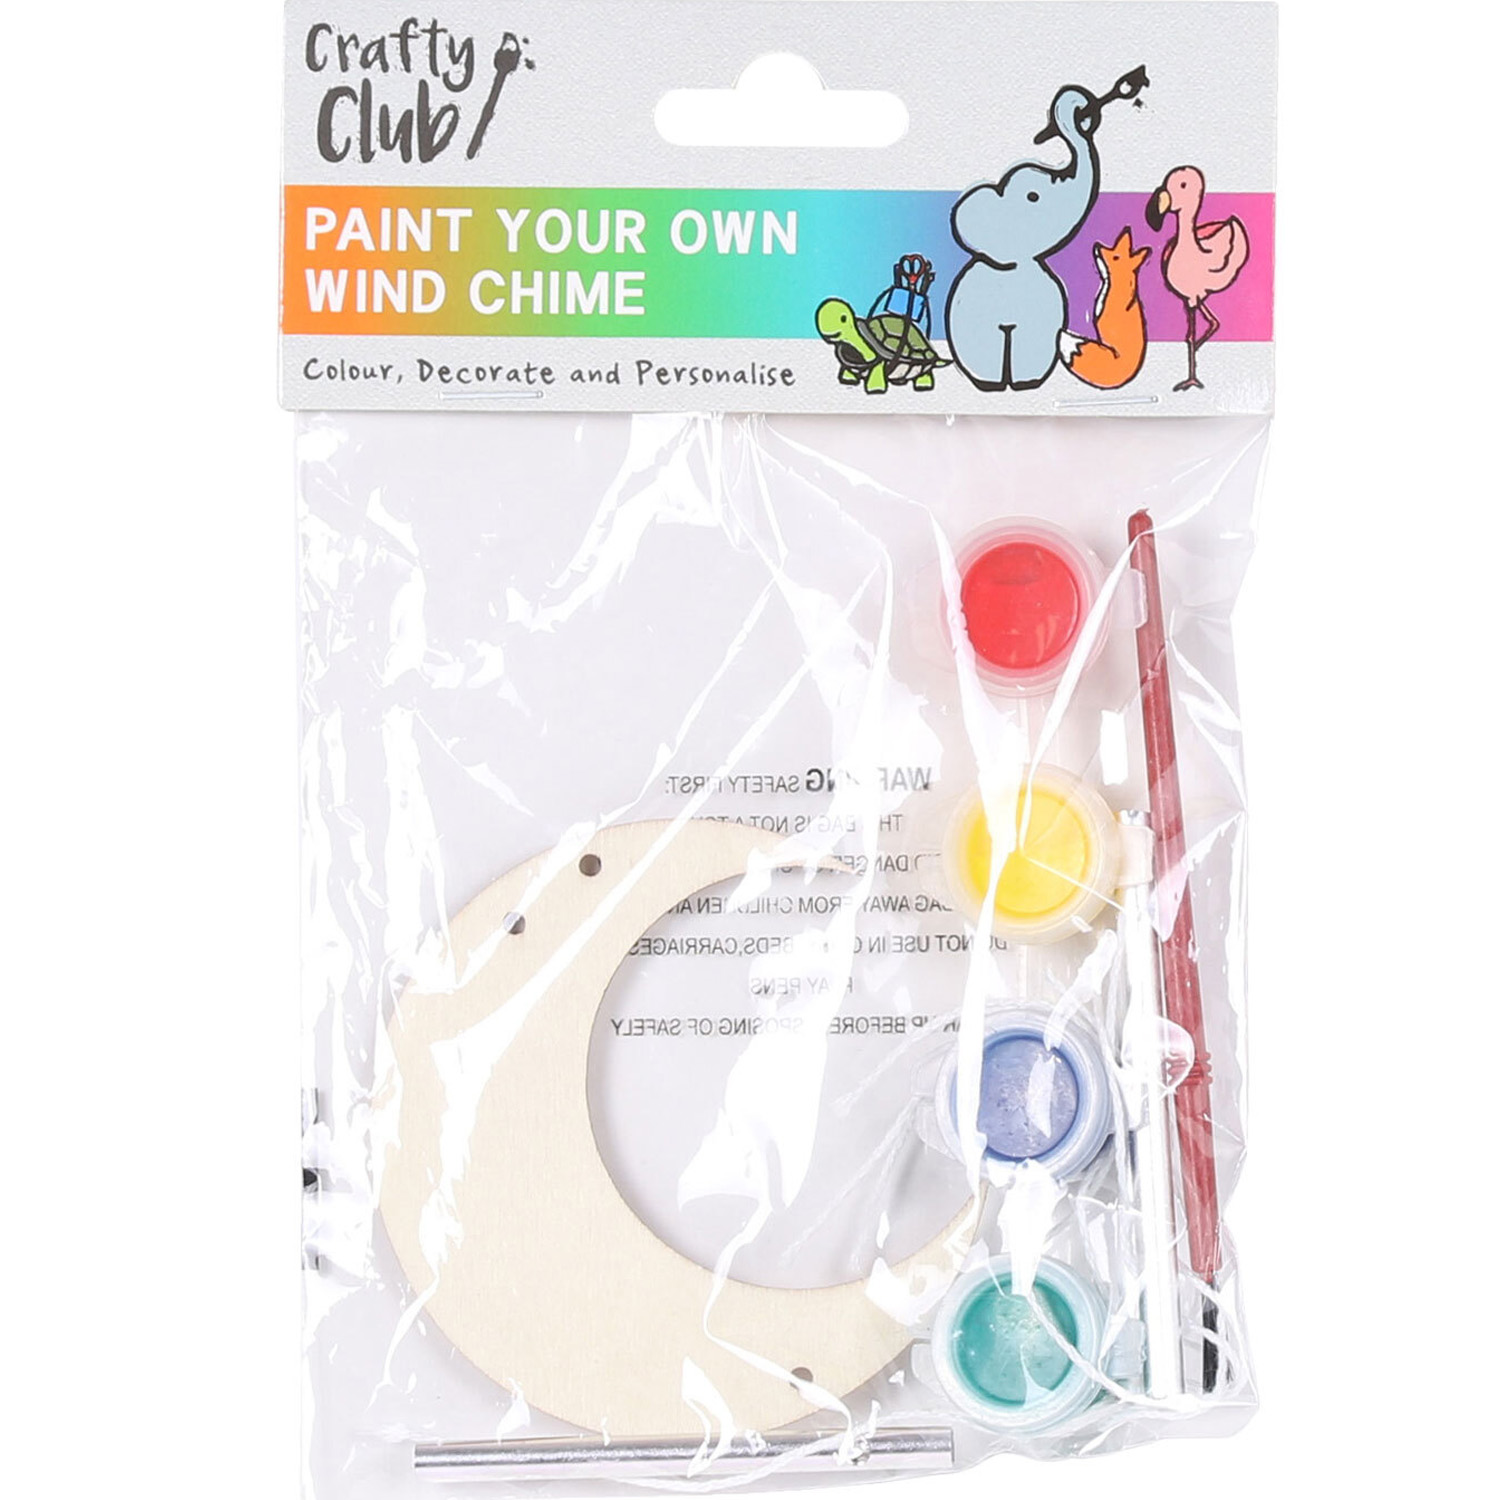 Single Crafty Club Paint Your Own Wind Chime Kit in Assorted styles Image 1